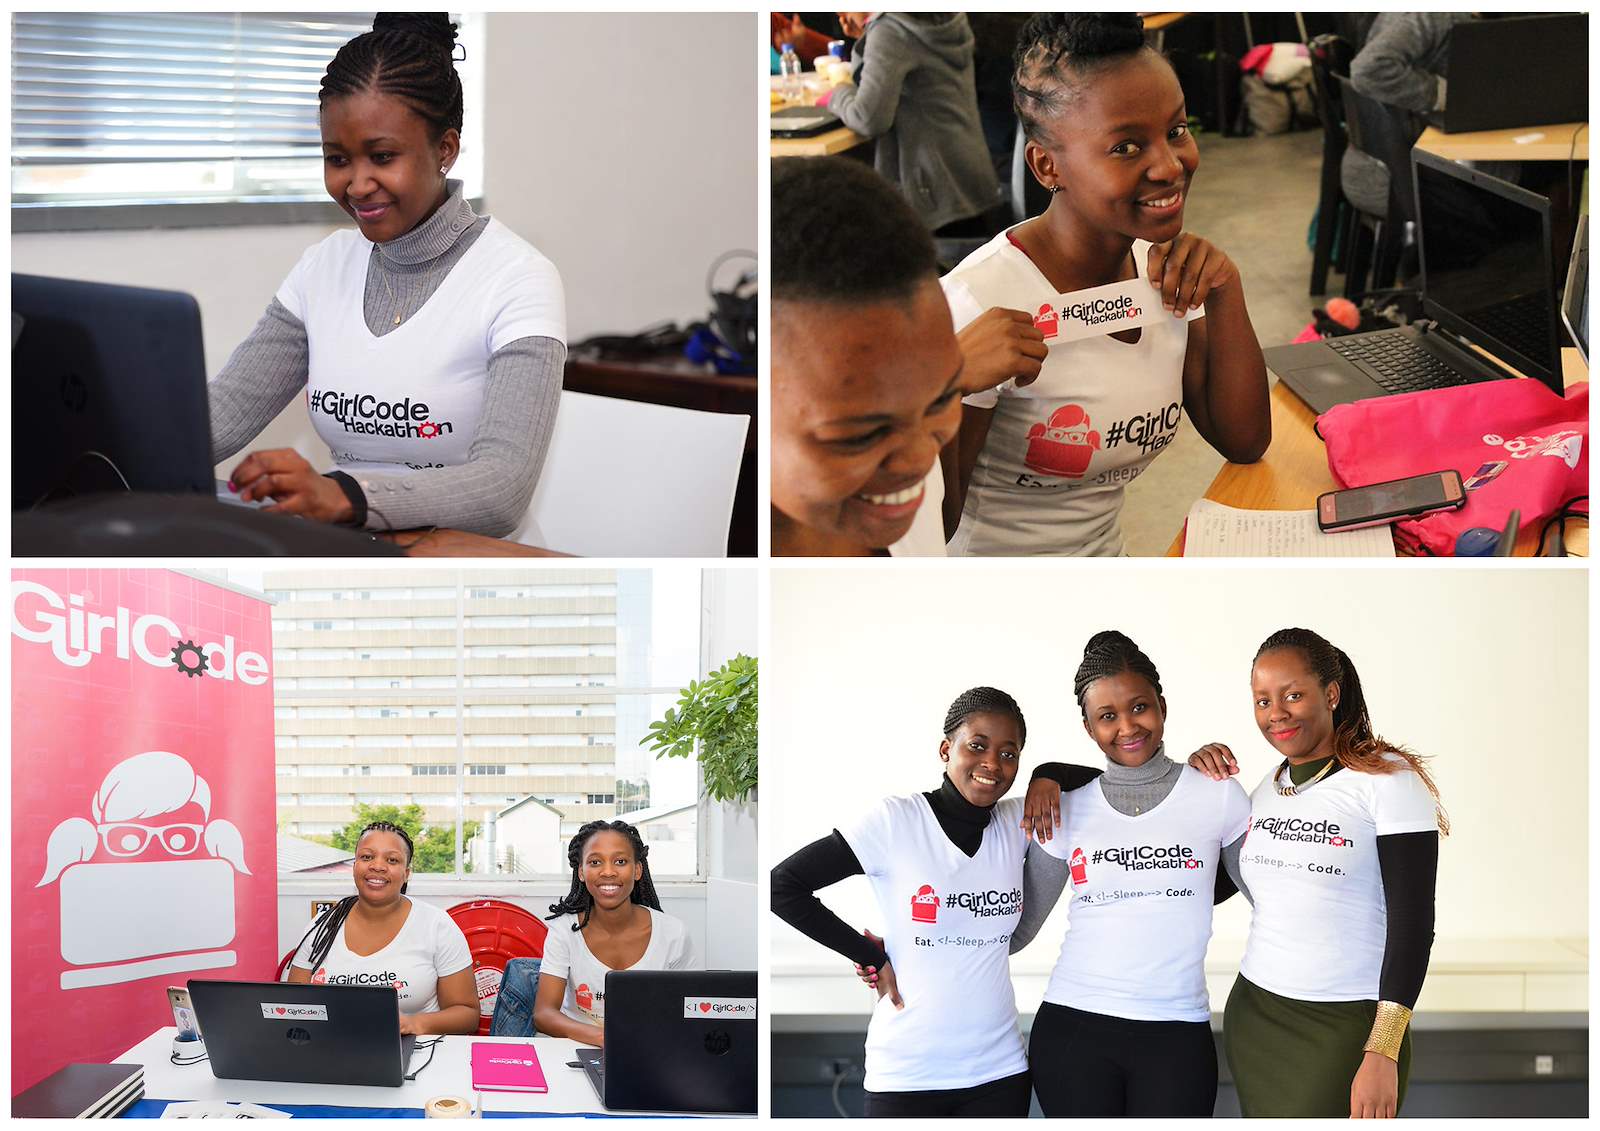 GirlCode is a non-profit organisation that aims to empower girls through technology